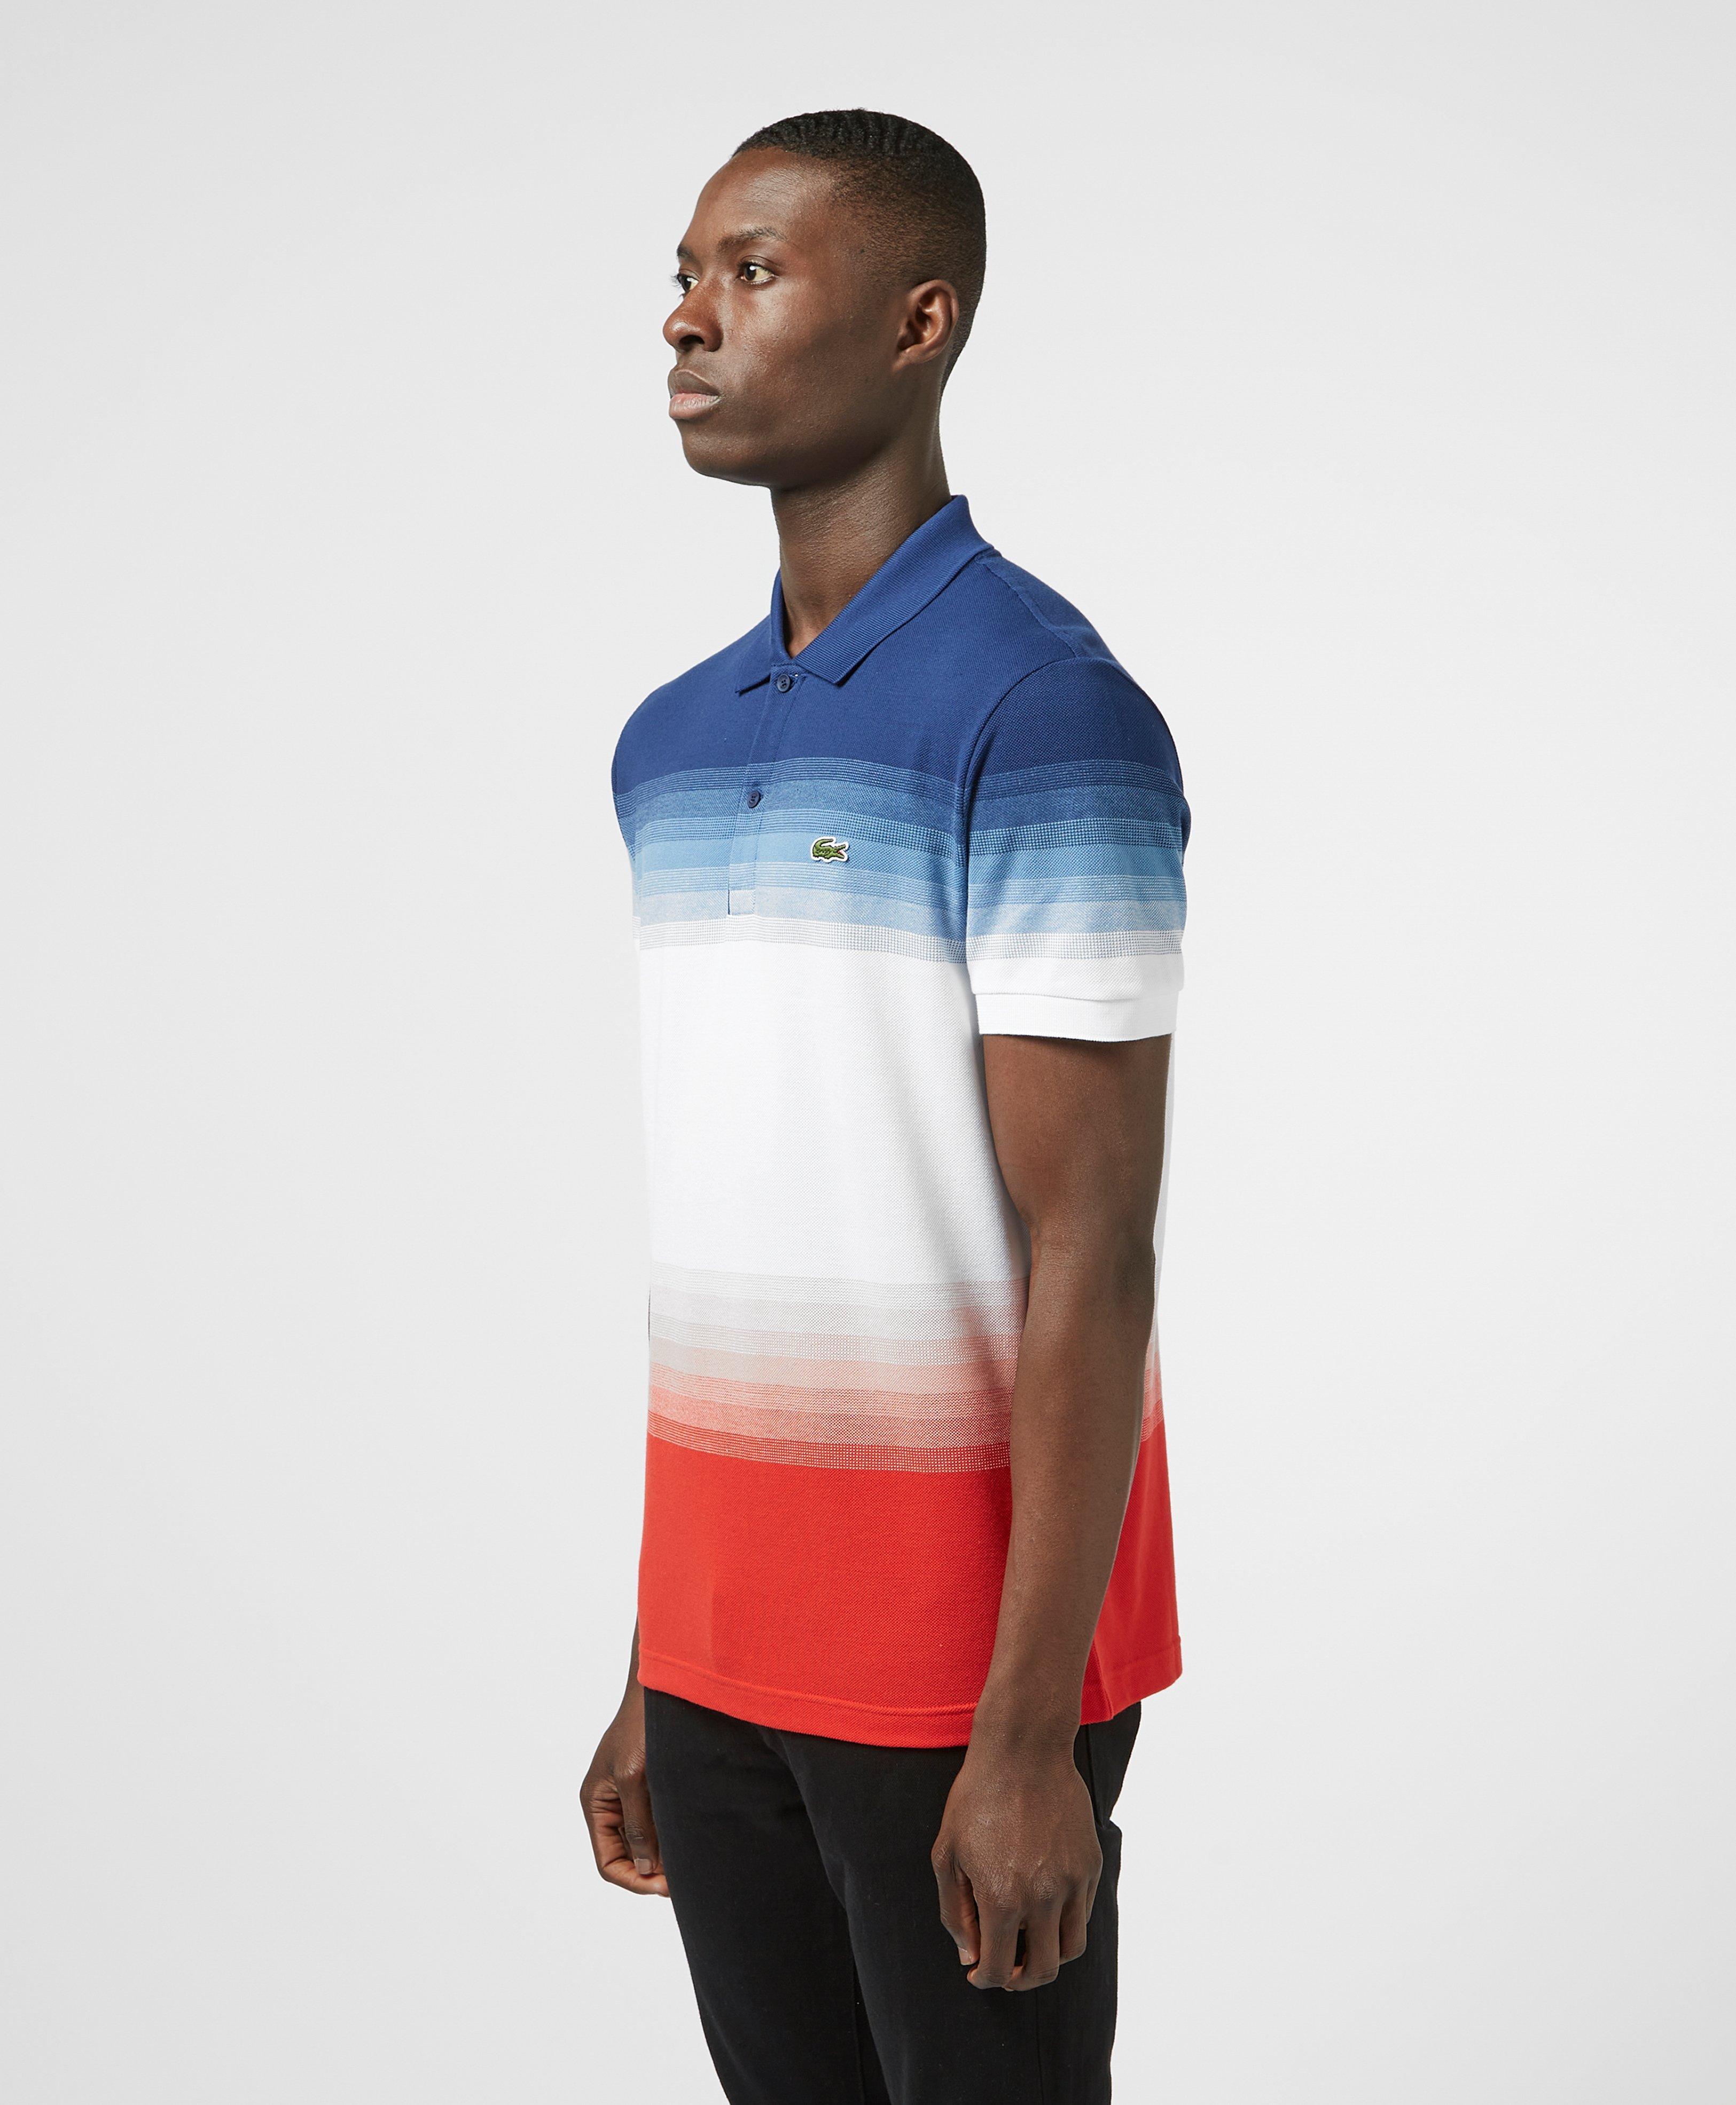 Lacoste Tricolour Fade Short Sleeve Polo Shirt in Blue for Men - Lyst